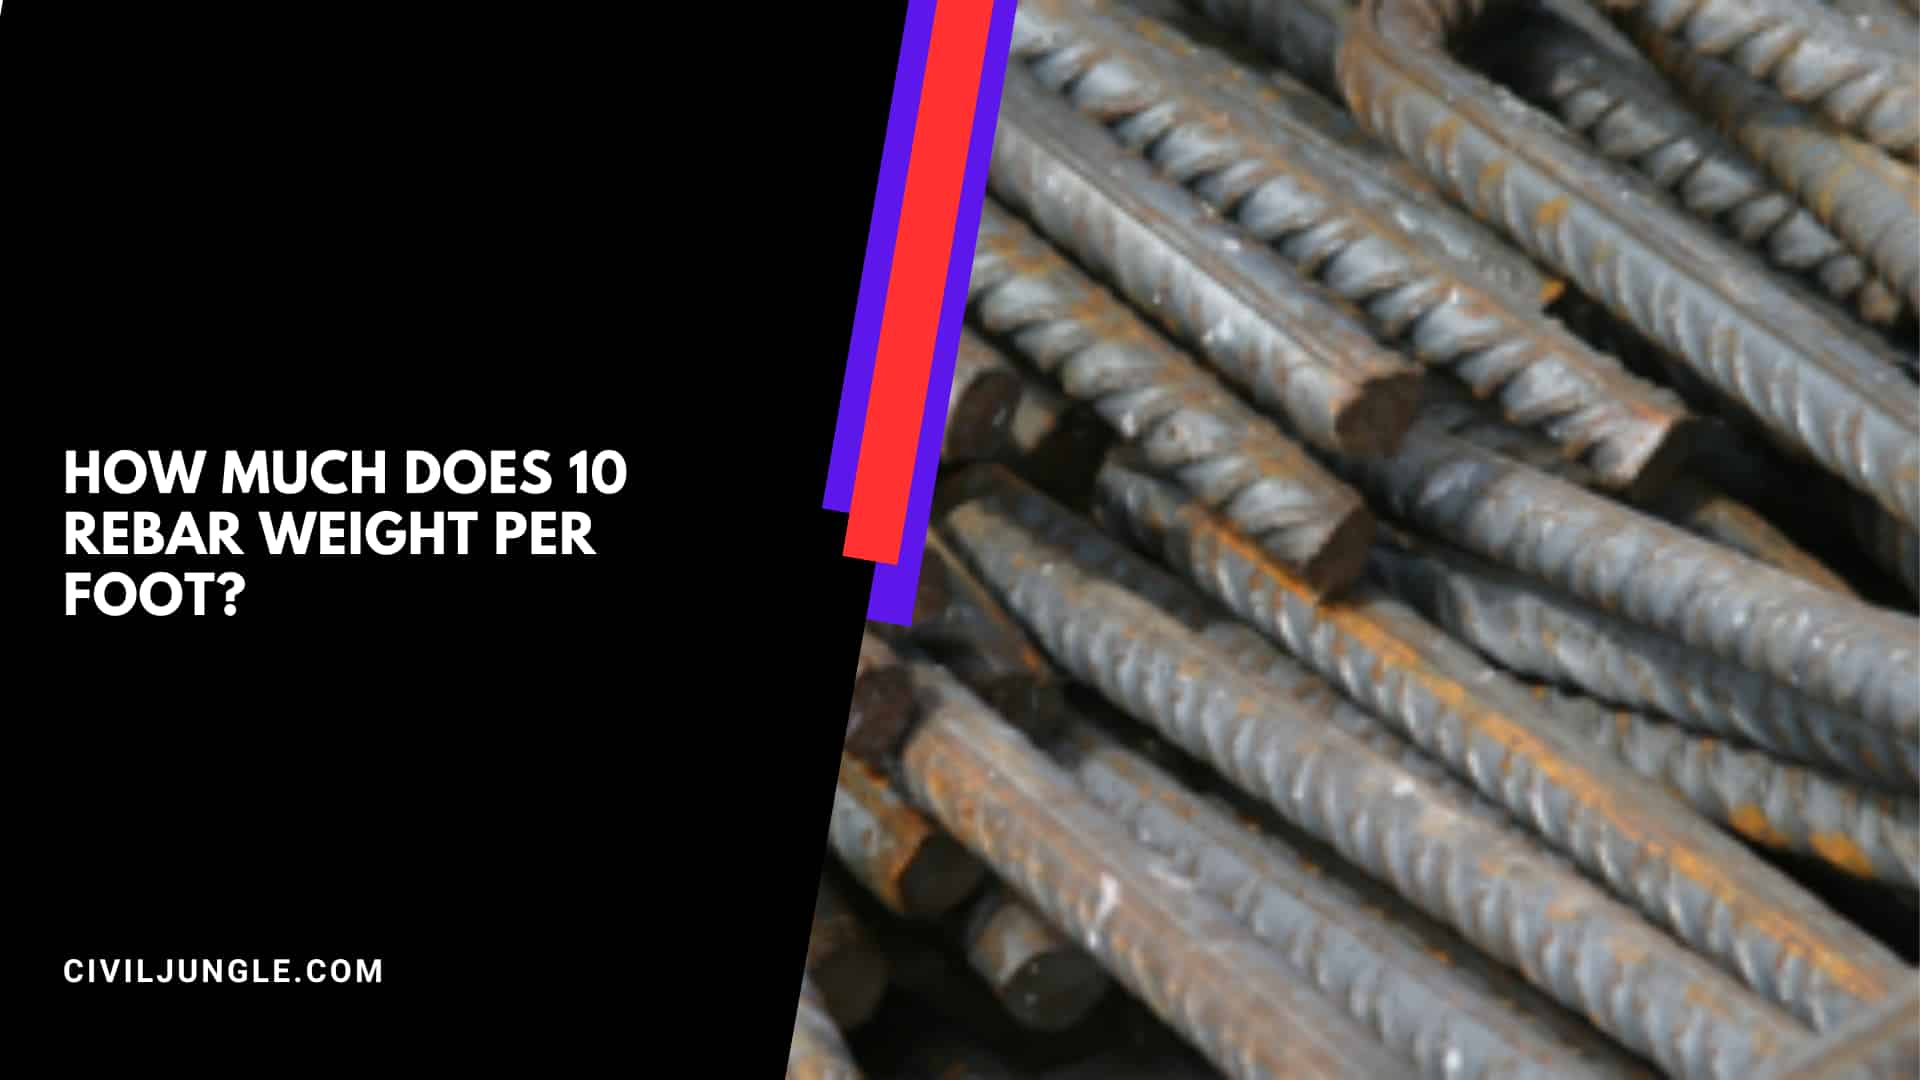 How Much Does 10 Rebar Weight Per Foot?